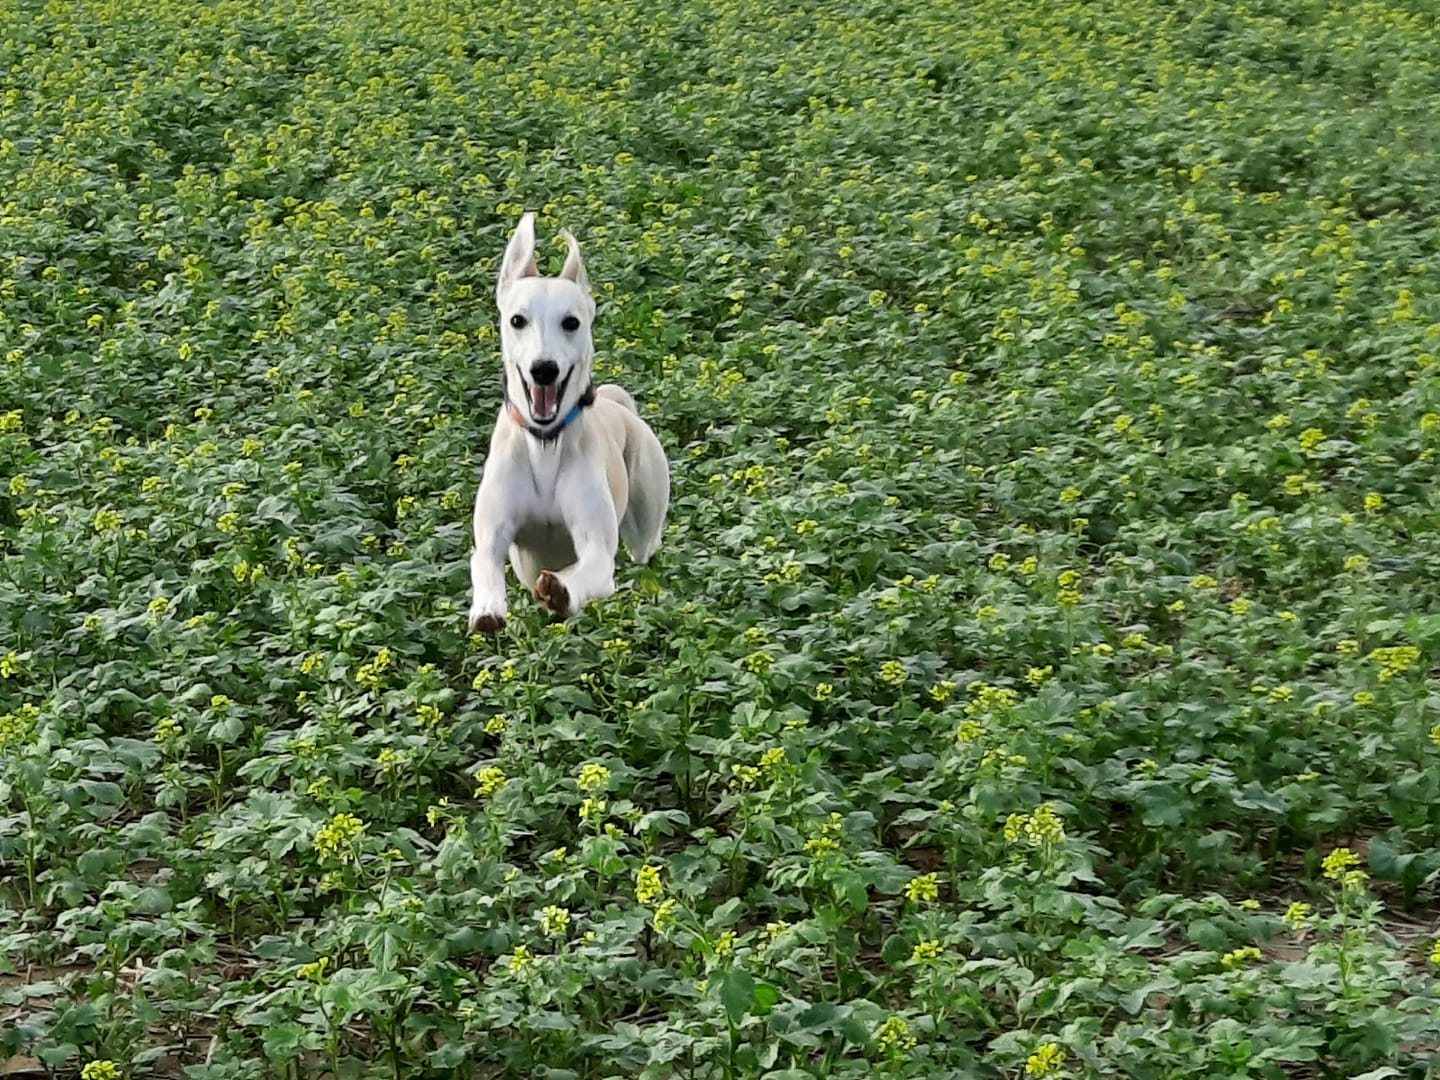 whippet dog jumping over mustard plants